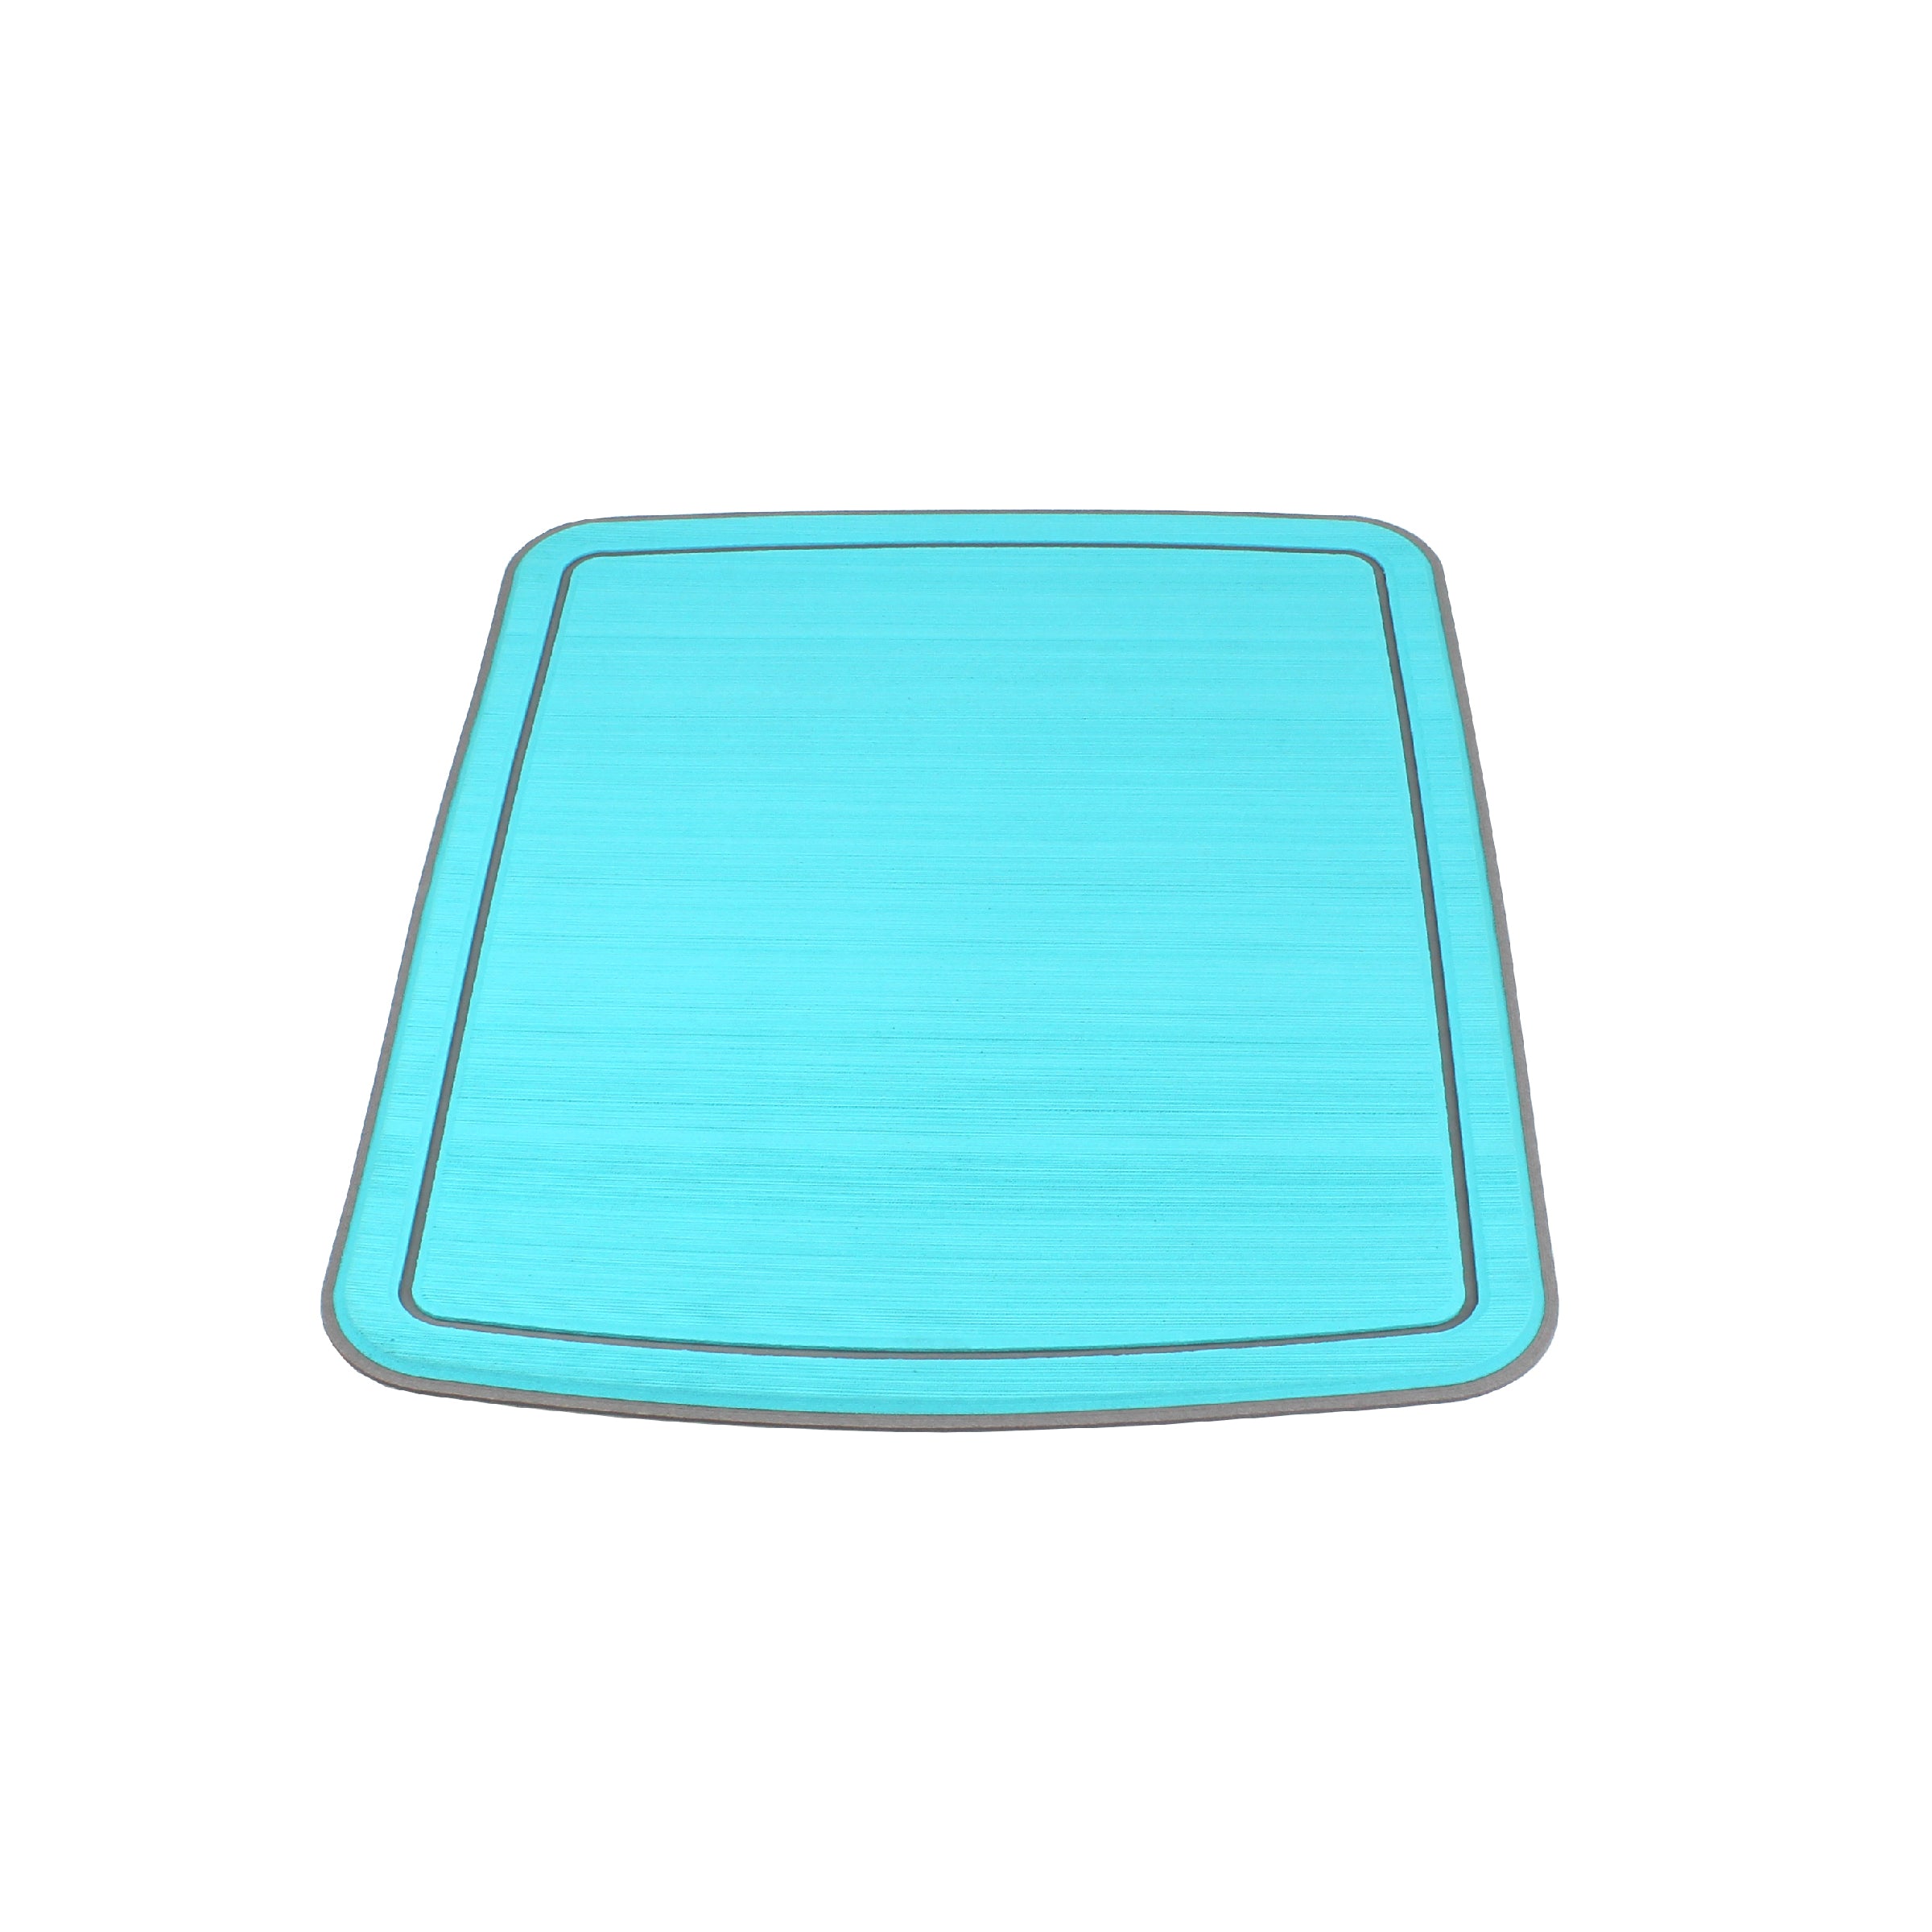 Party Boat Table Center Foam Turquoise Mats | ITC Shop Now